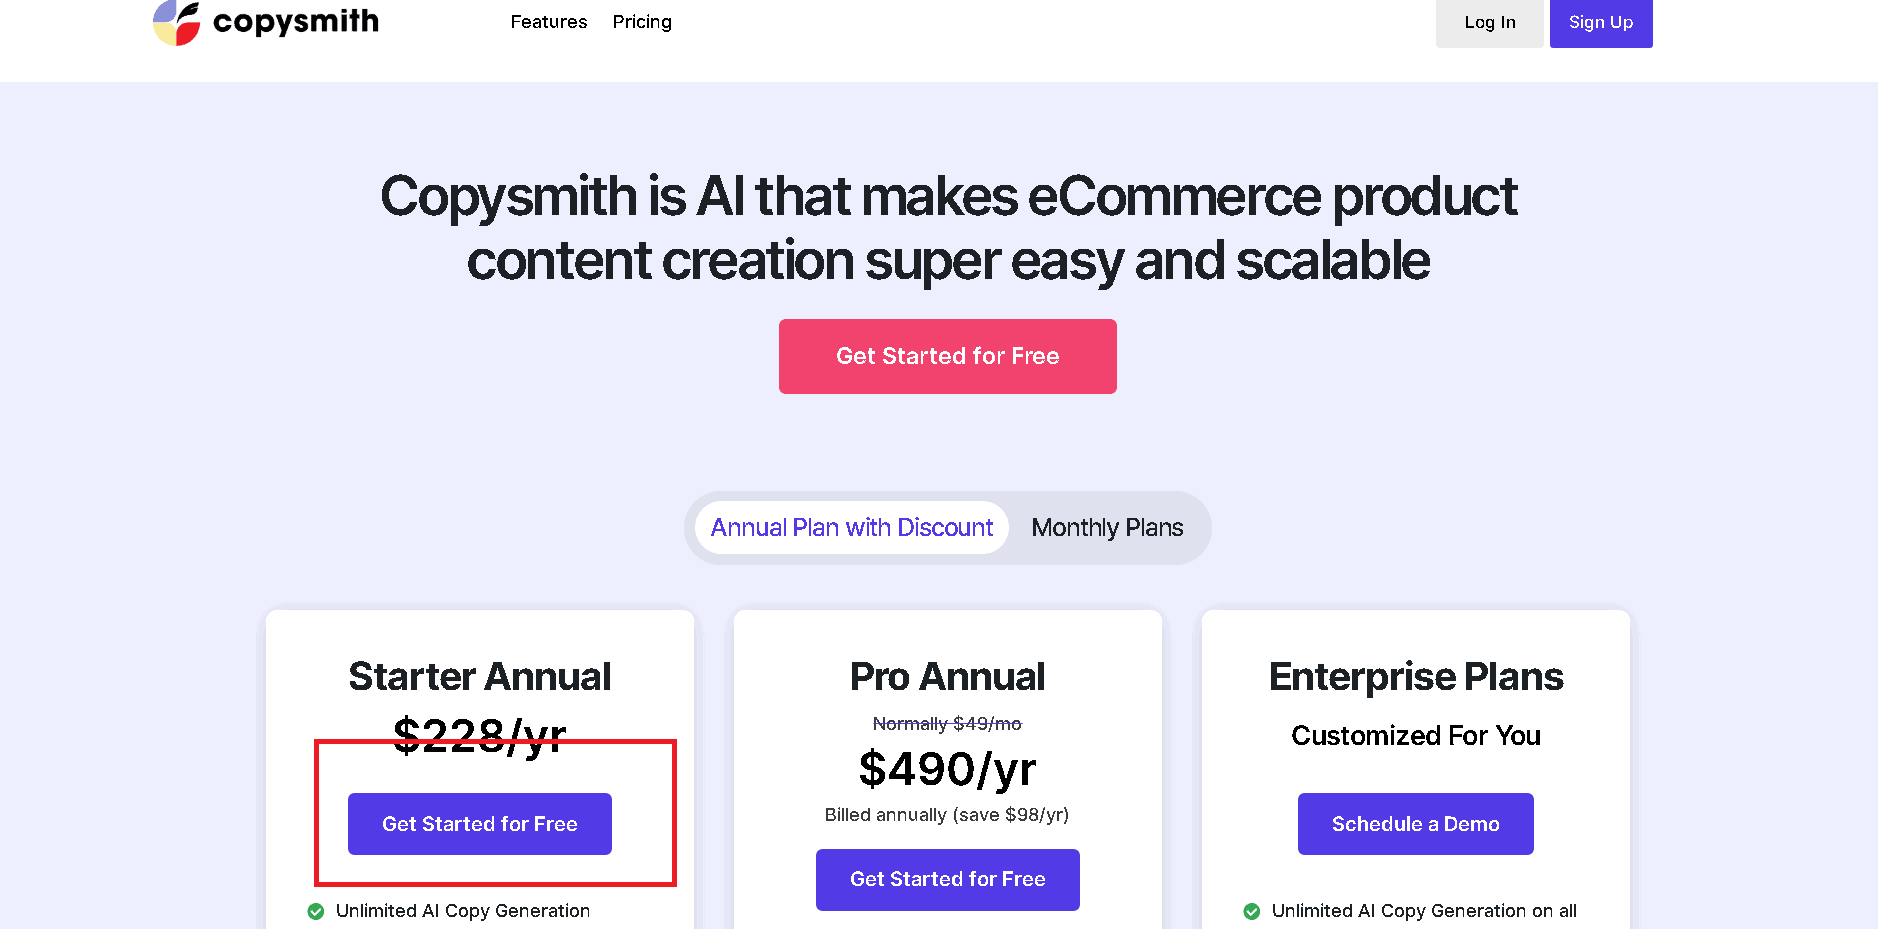 start a free trial with Copysmith